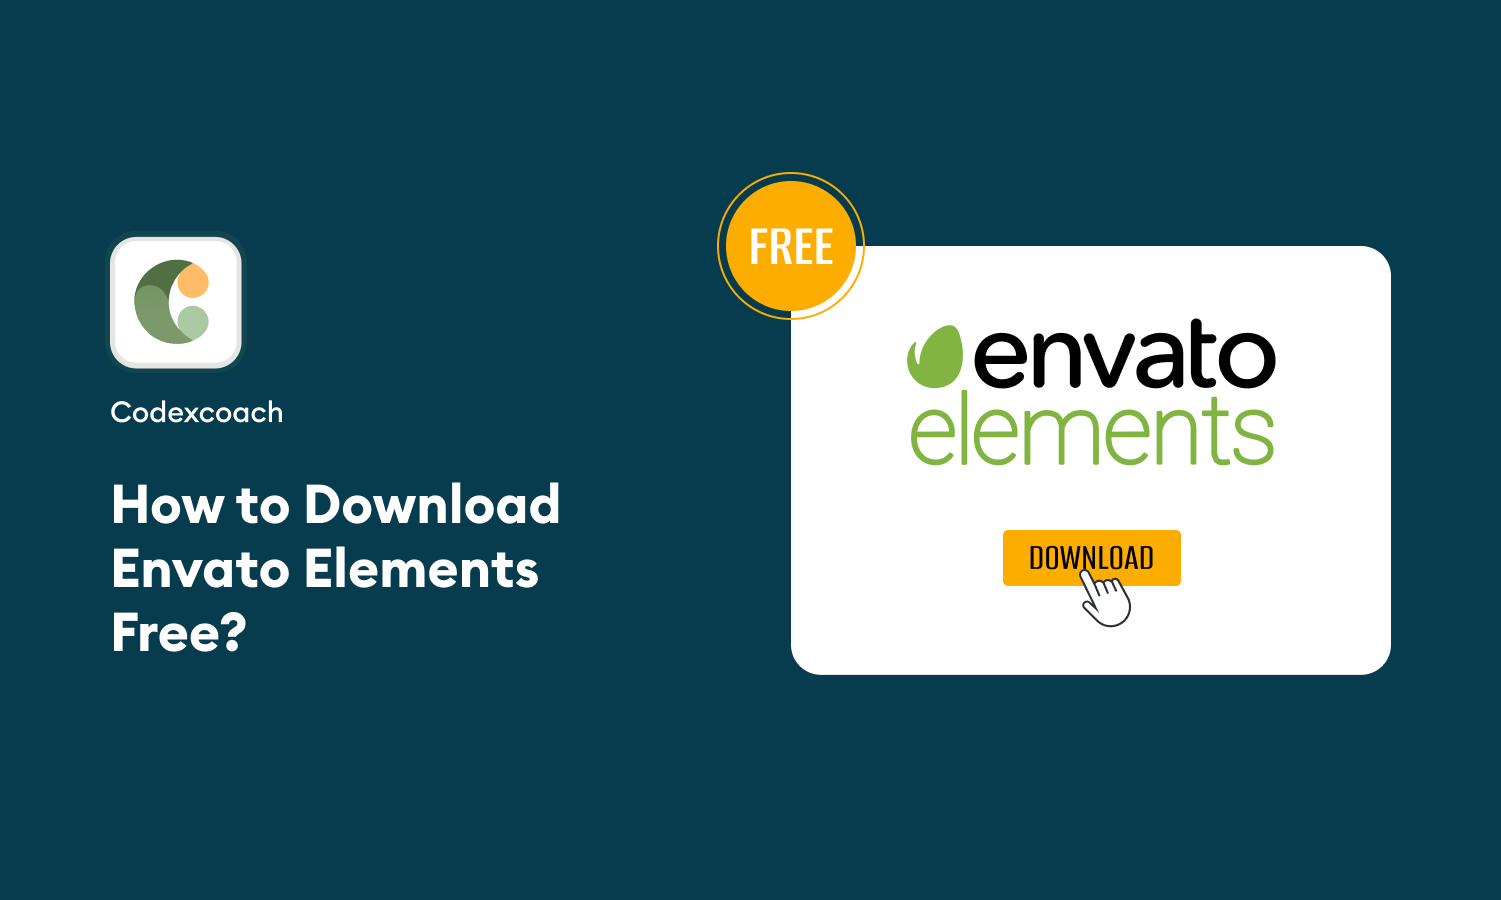 How To Download Envato Elements Free?